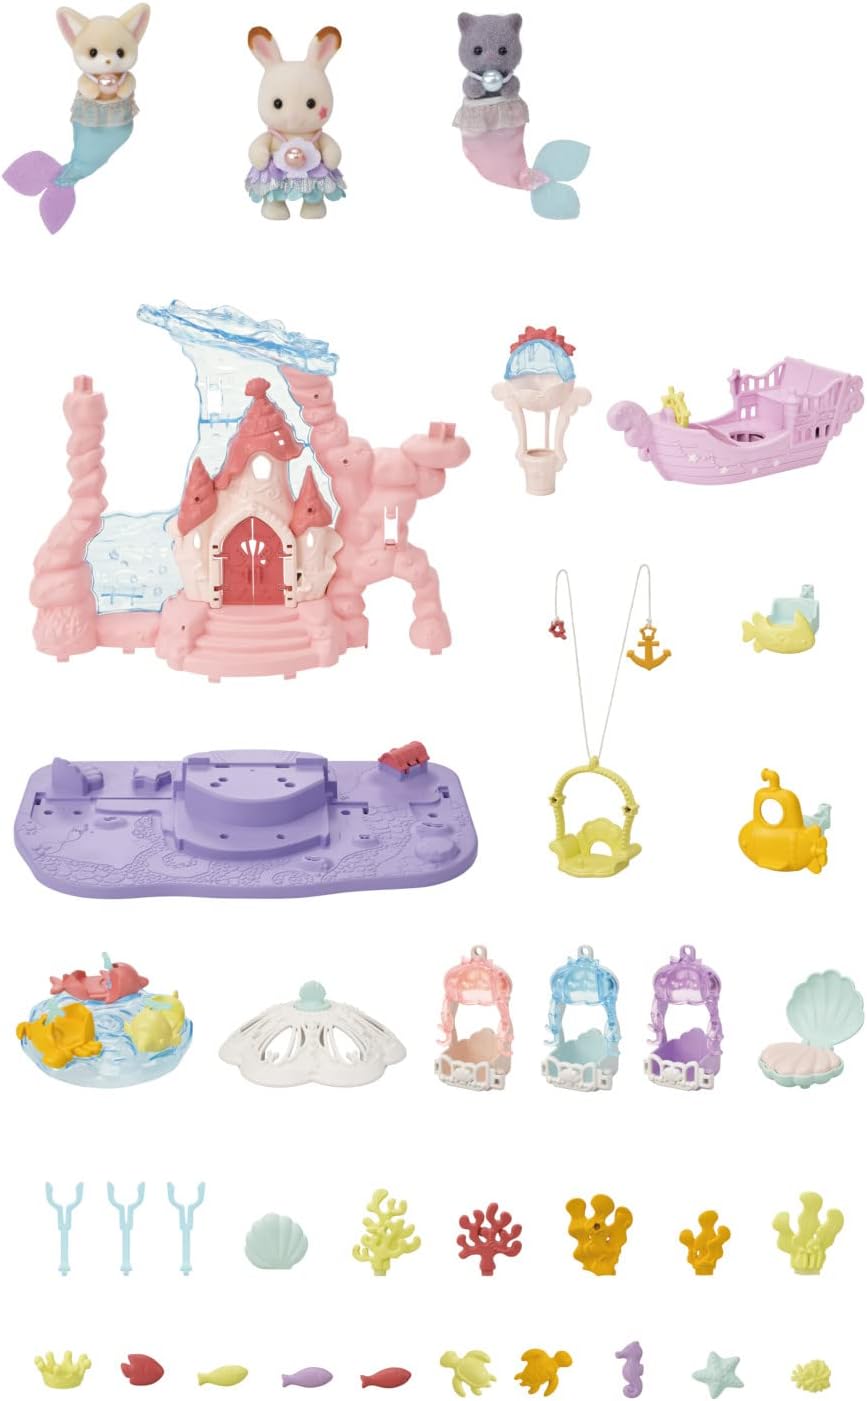 Mermaid Castle by Calico Critters #CC2073